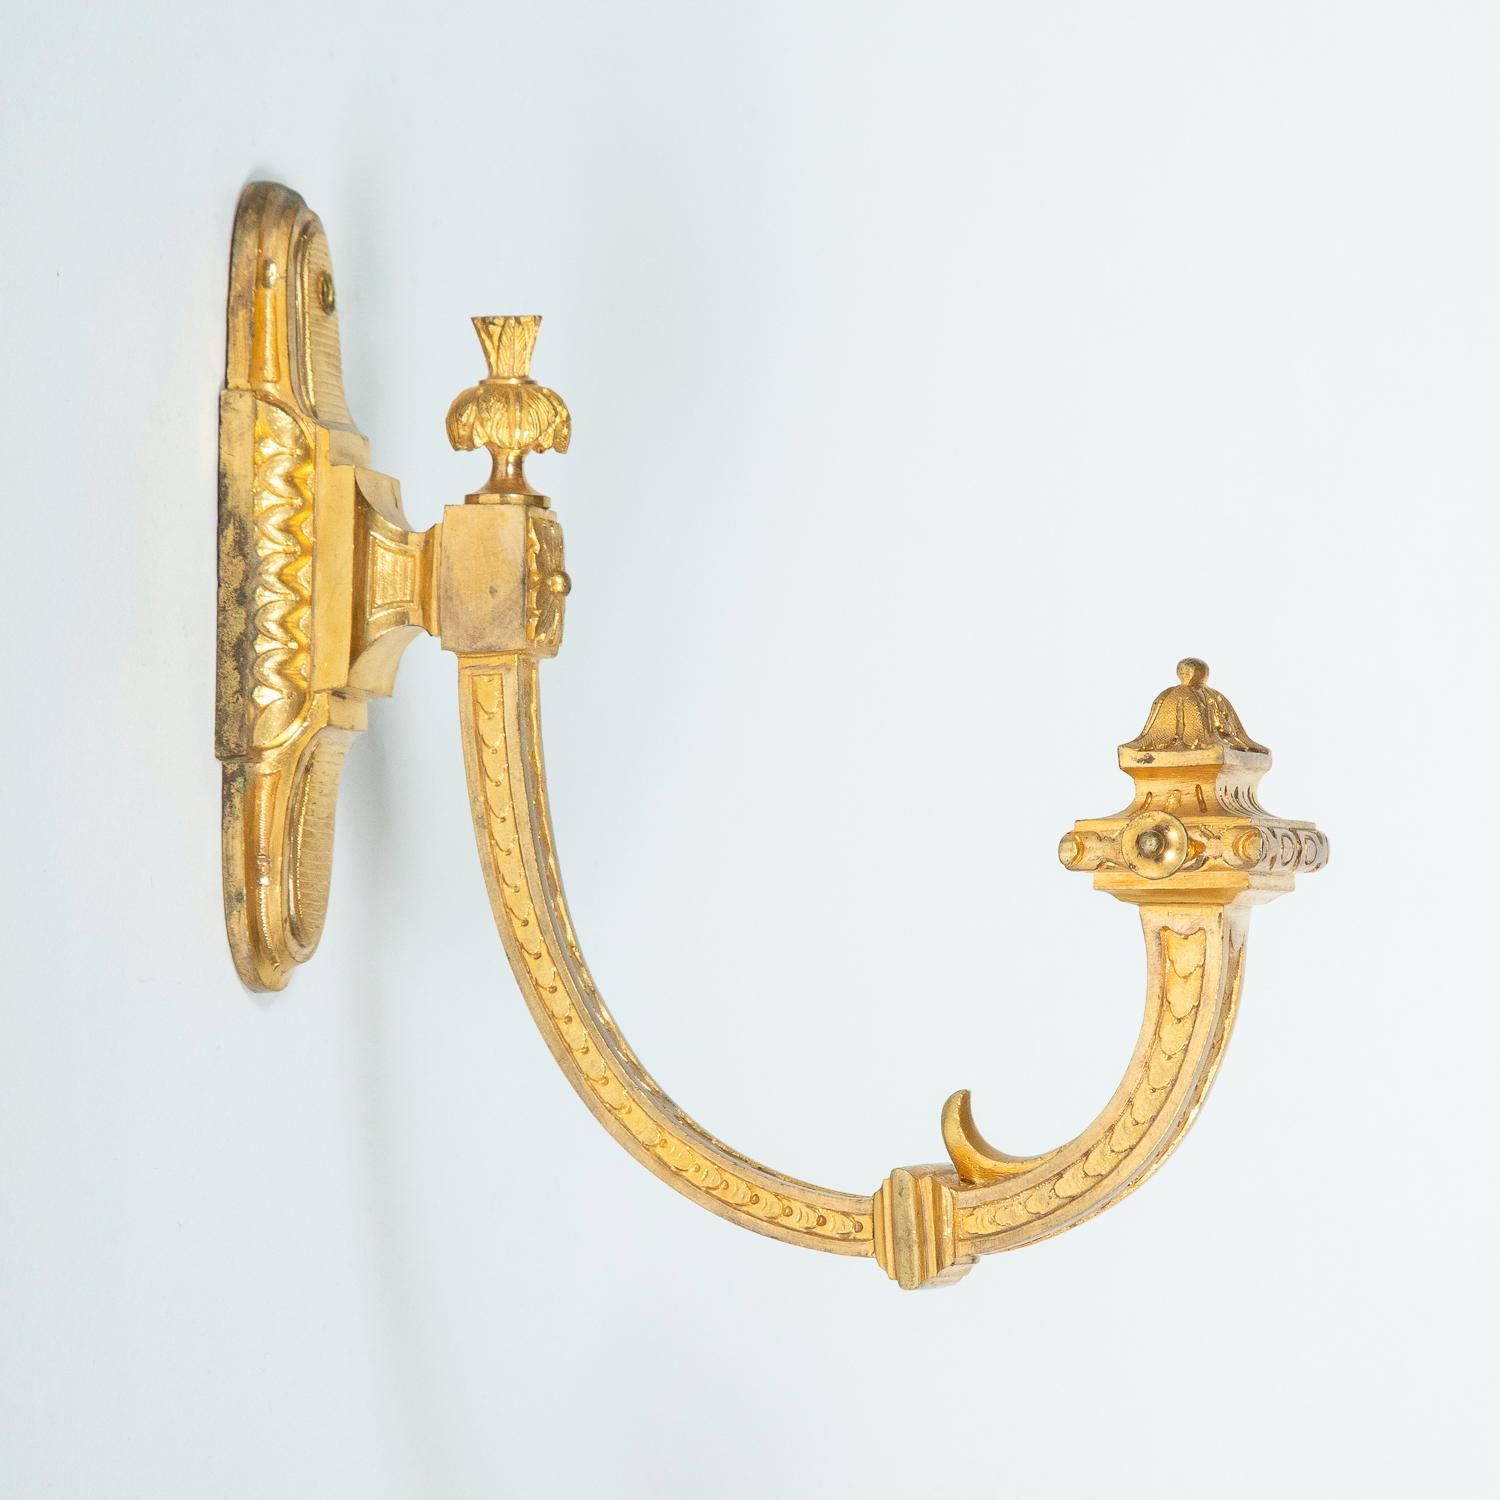 A pair of chiselled gilt bronze French curtain tie backs.

Weight: 2.2 kg.